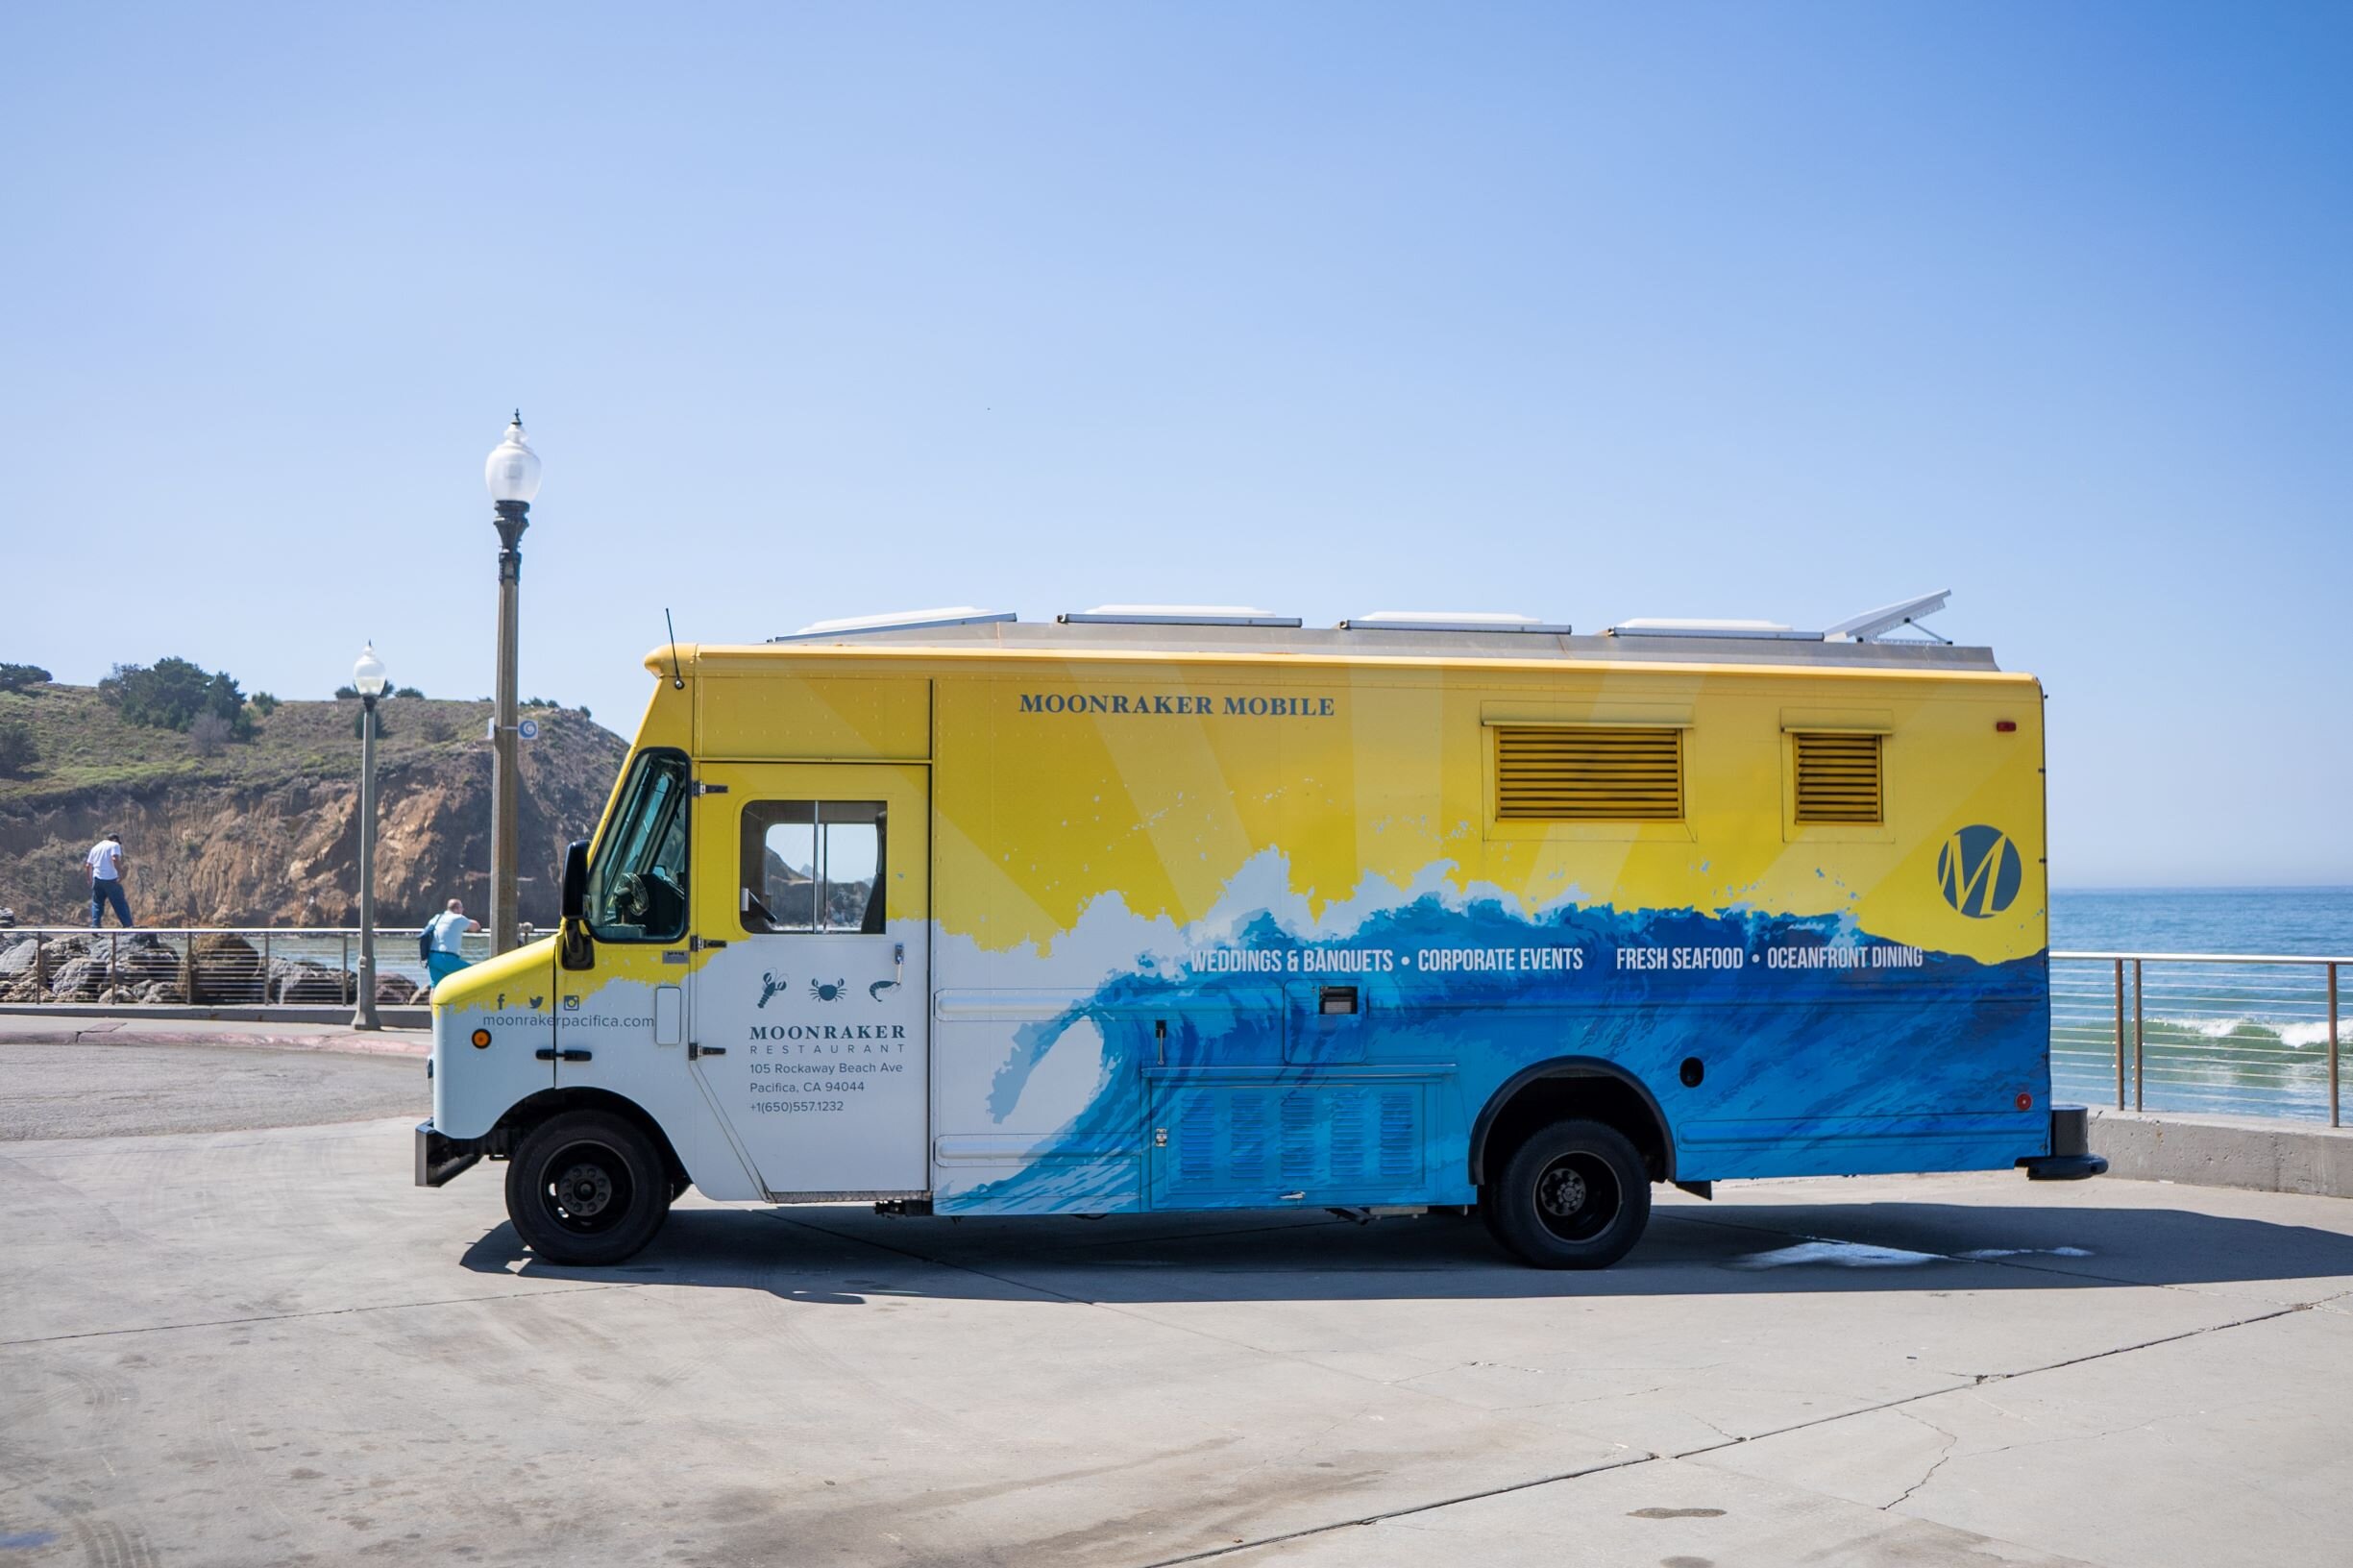 9-12-19 Food Trucks and Cocktails Moonraker Pacifica California - WEB - by Jesse Meria 026.jpg